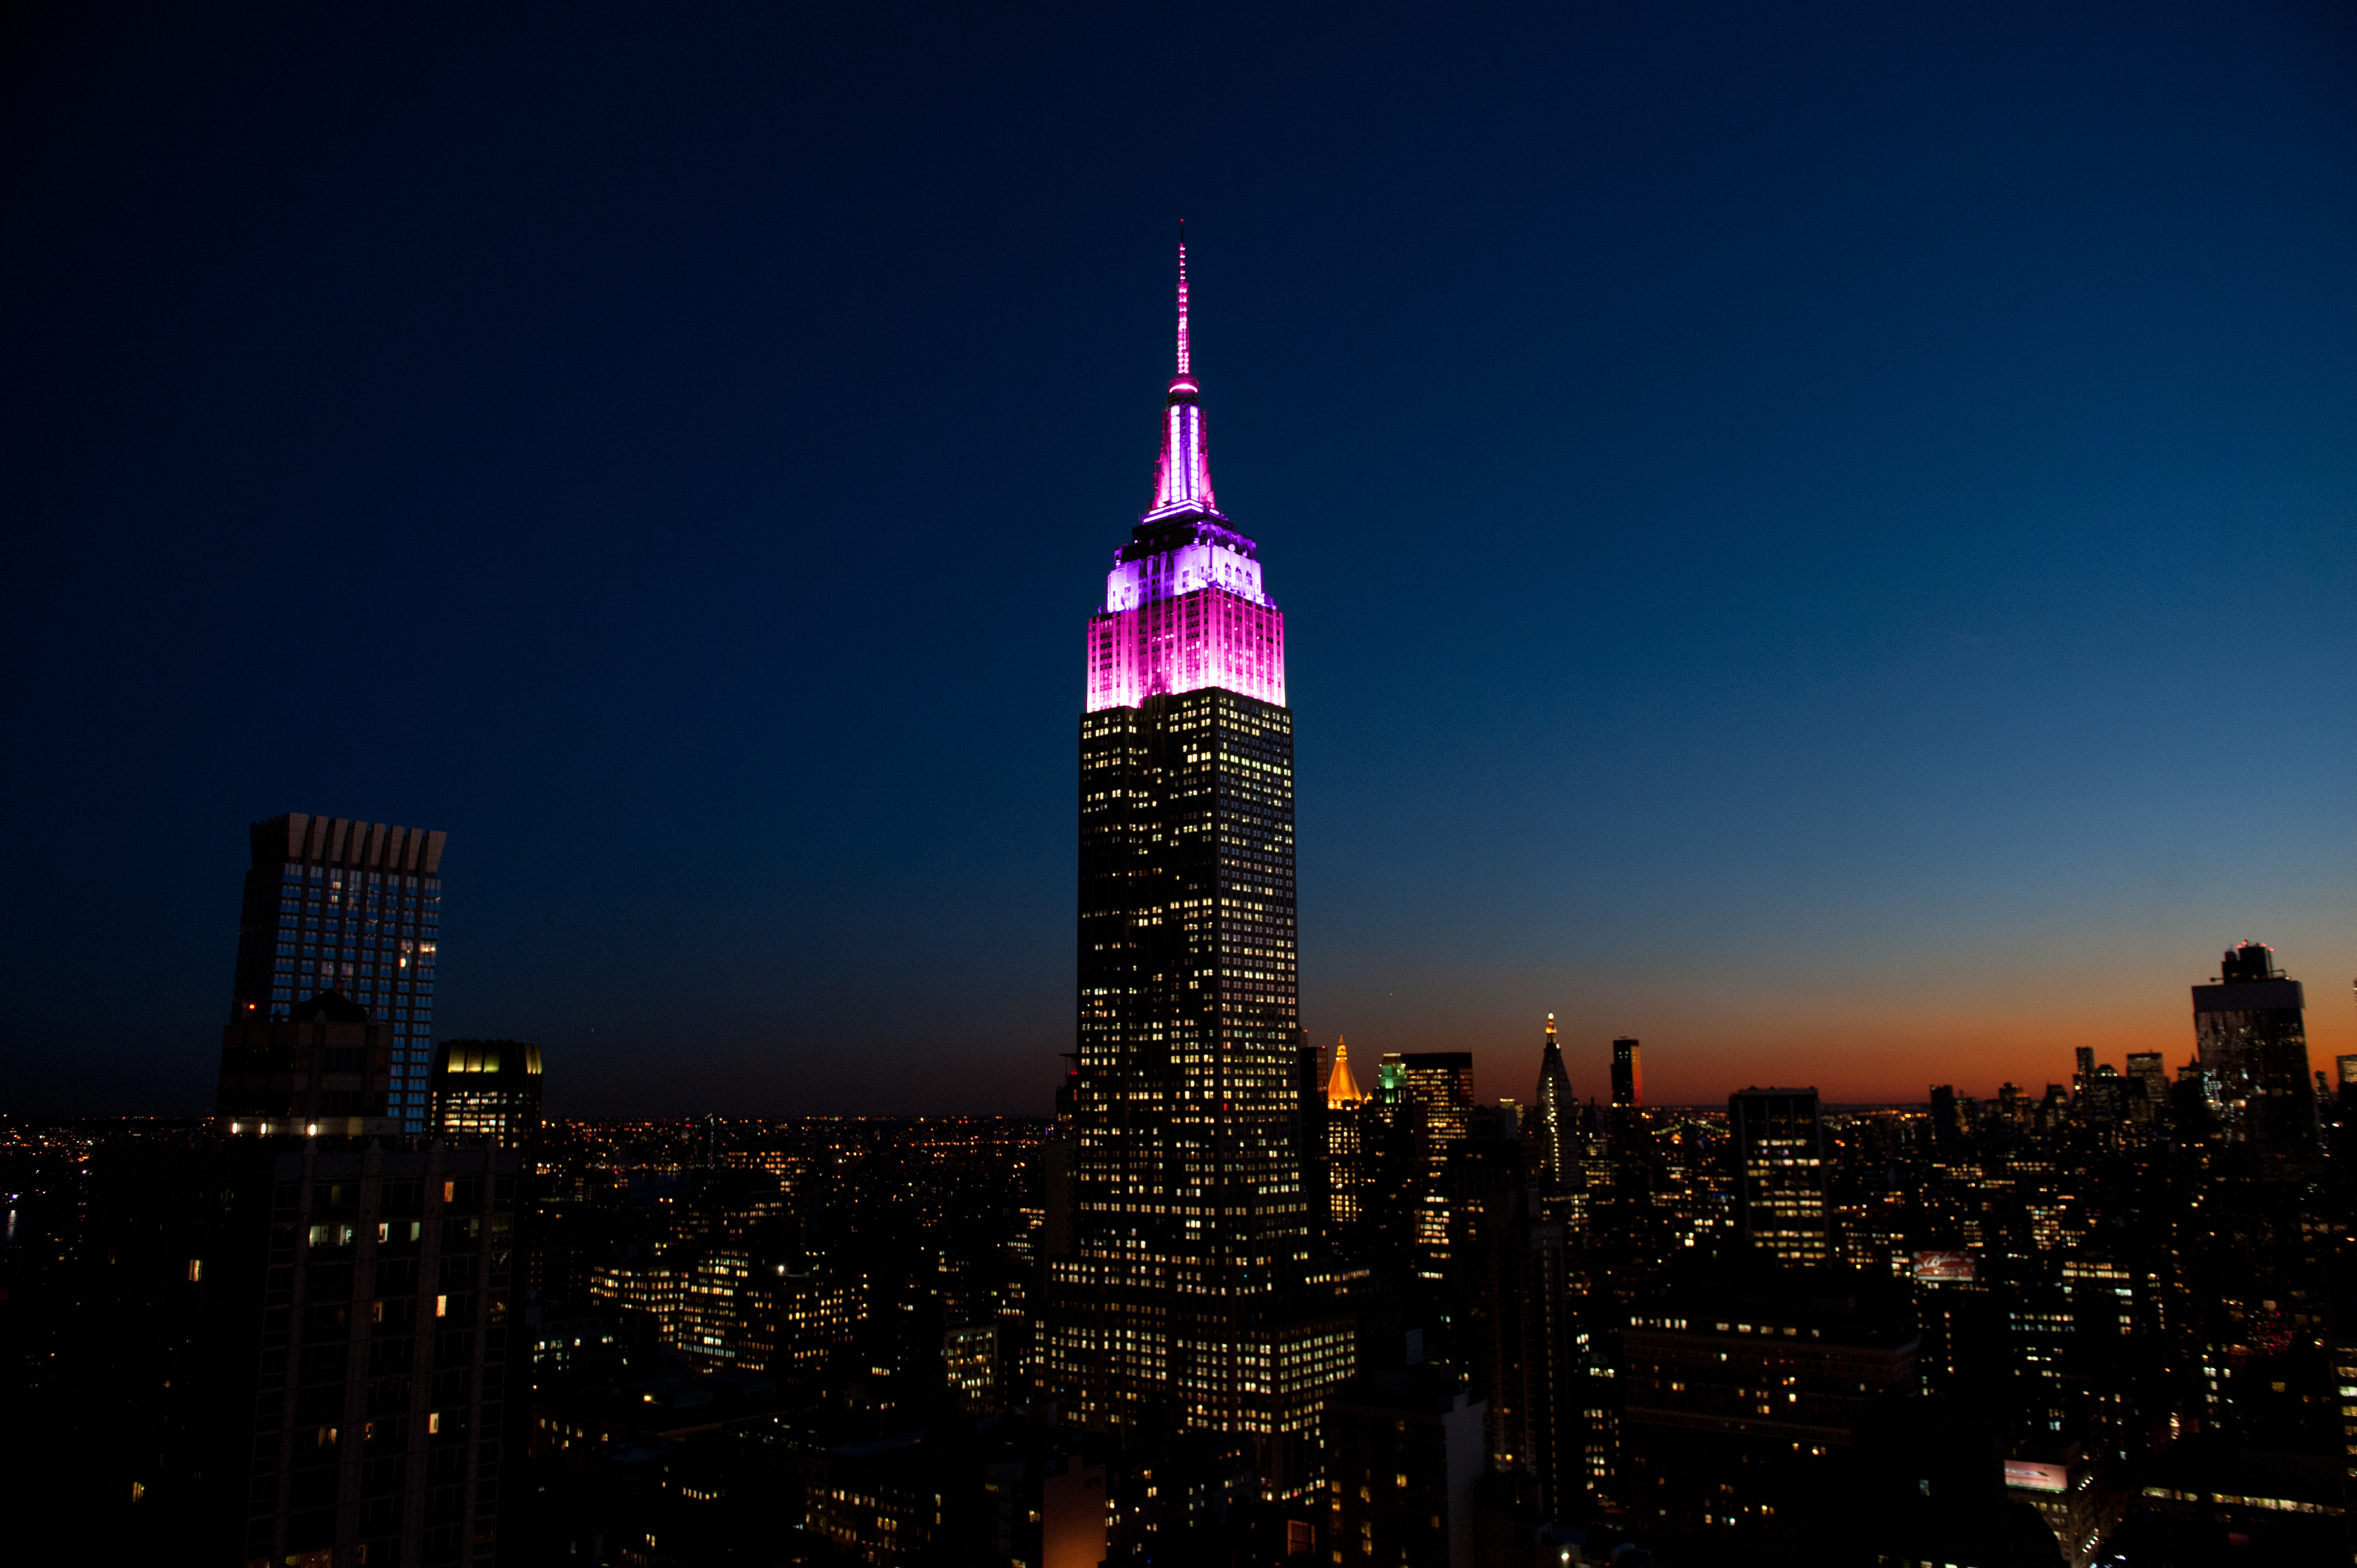 ESB lit in pink and purple for Hoda & Jenna